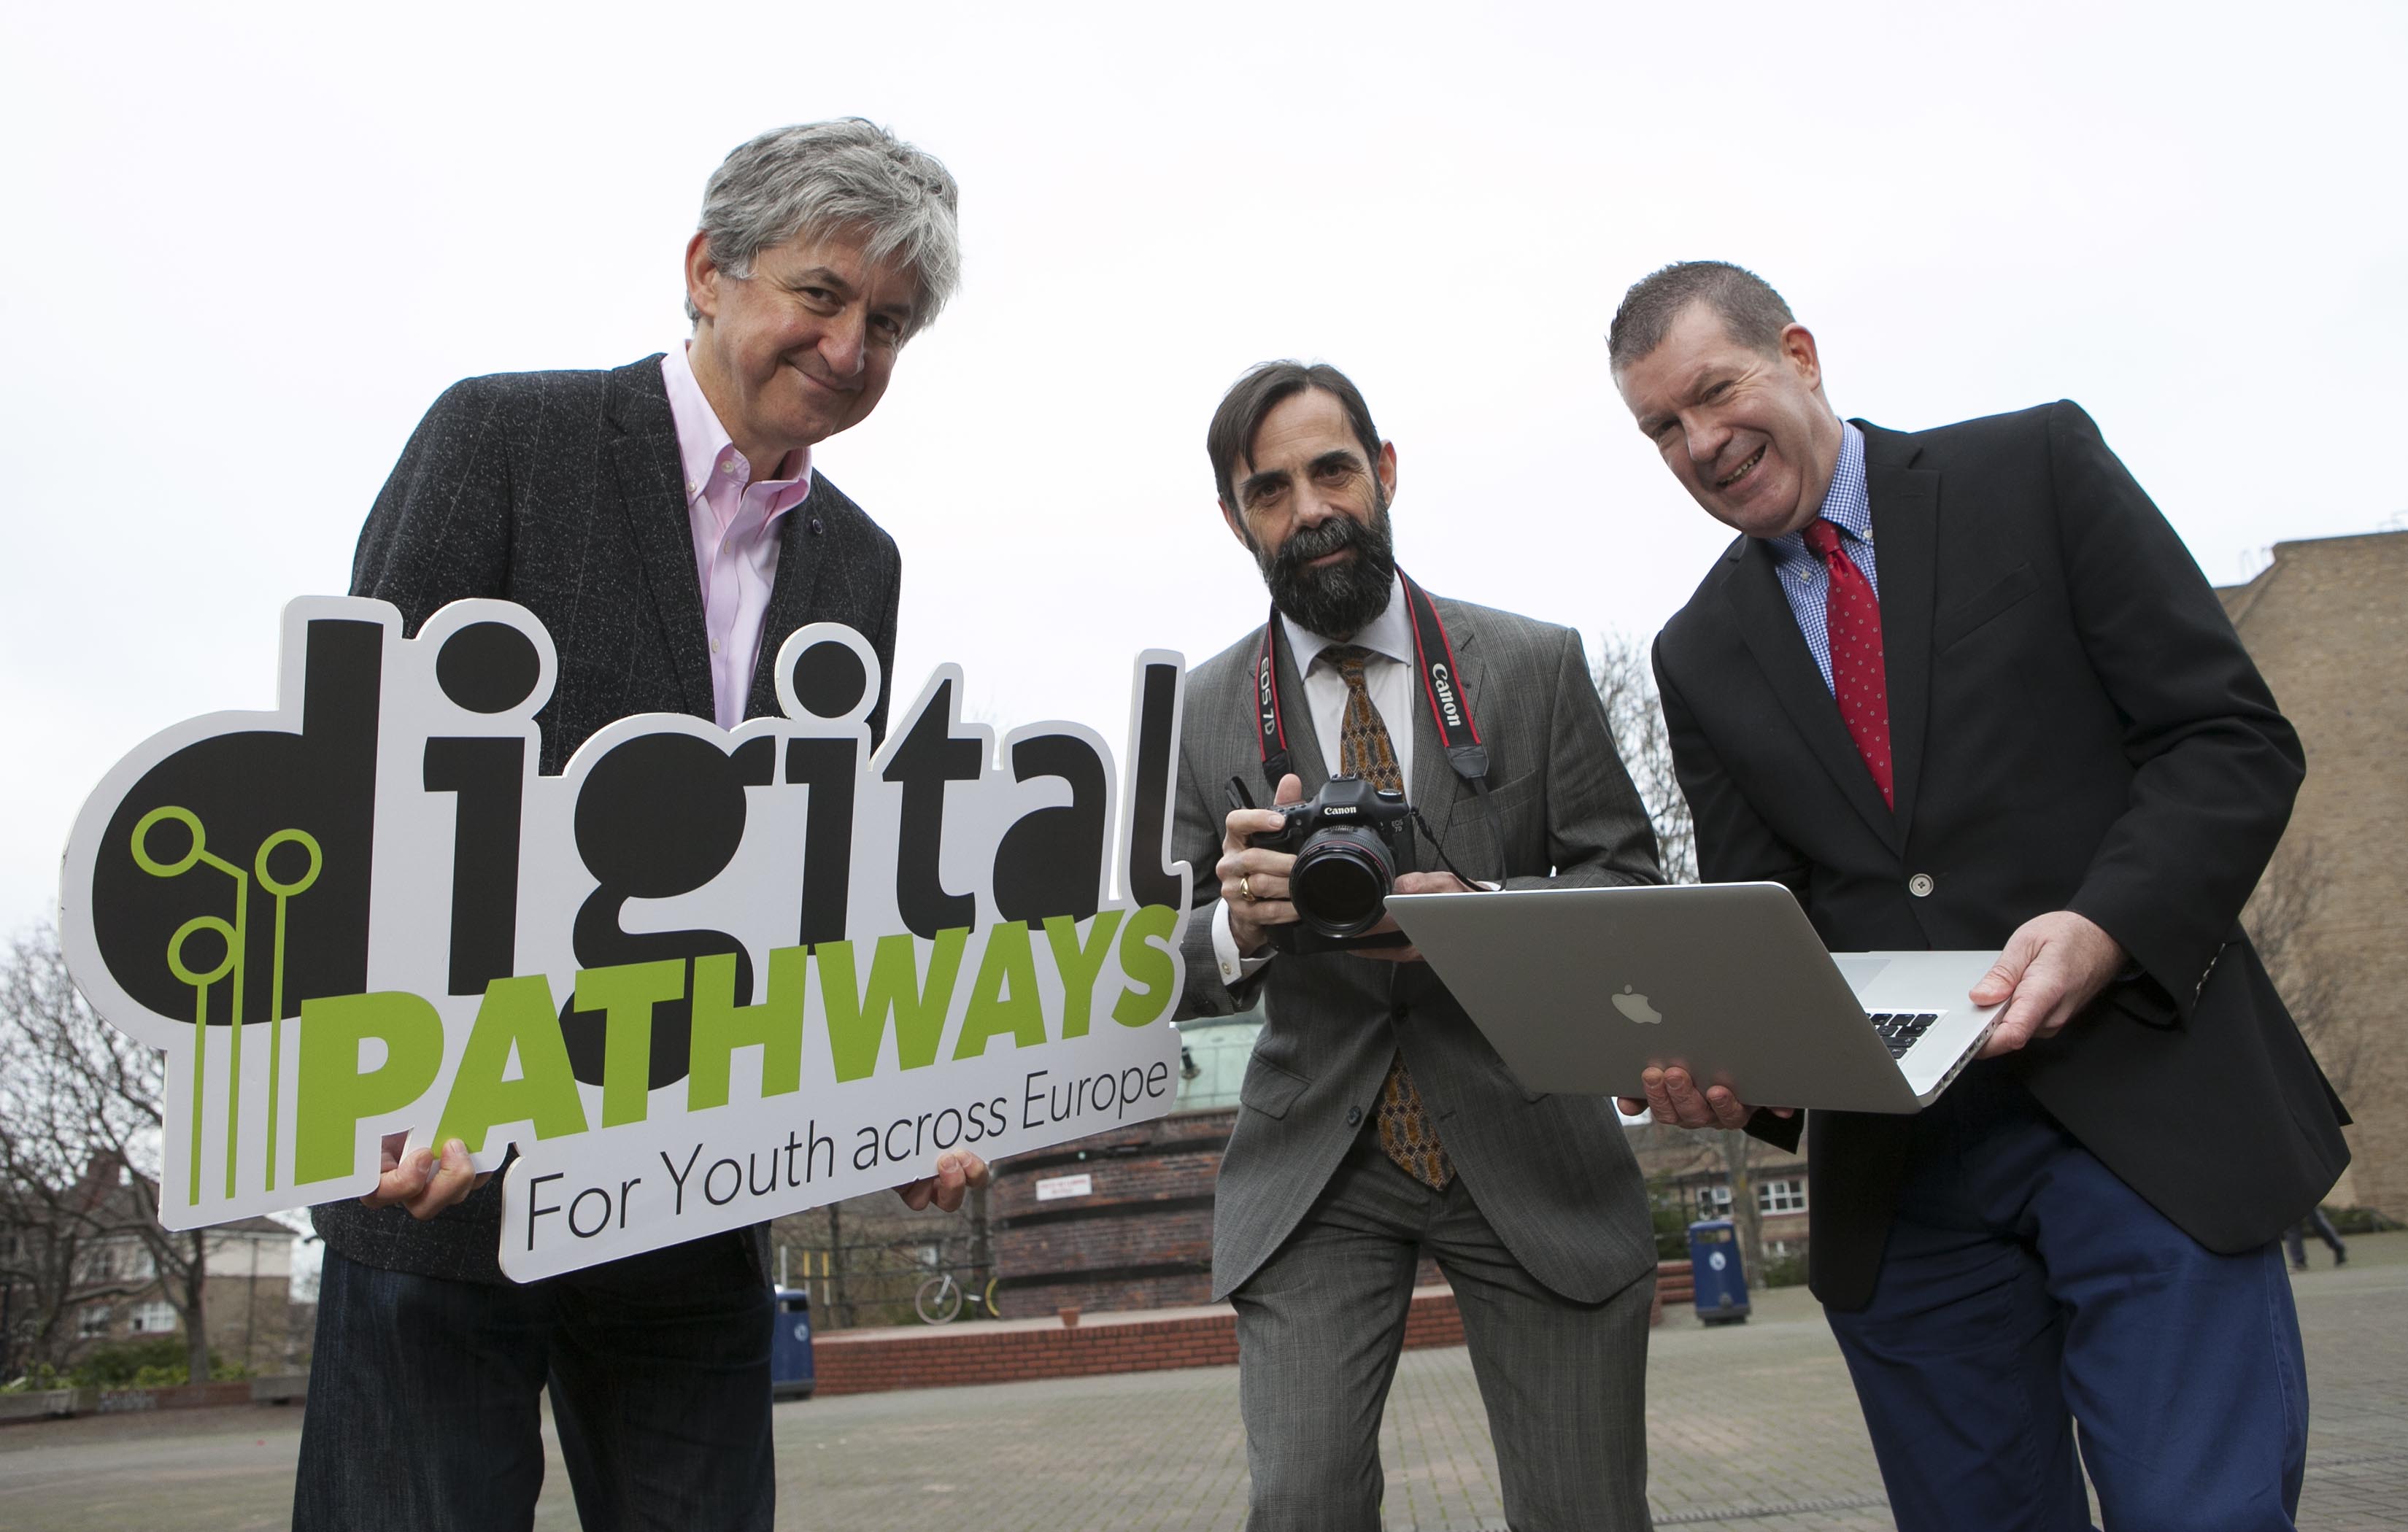 Press Release: ‘Creating Digital Pathways for Young People’ Conference